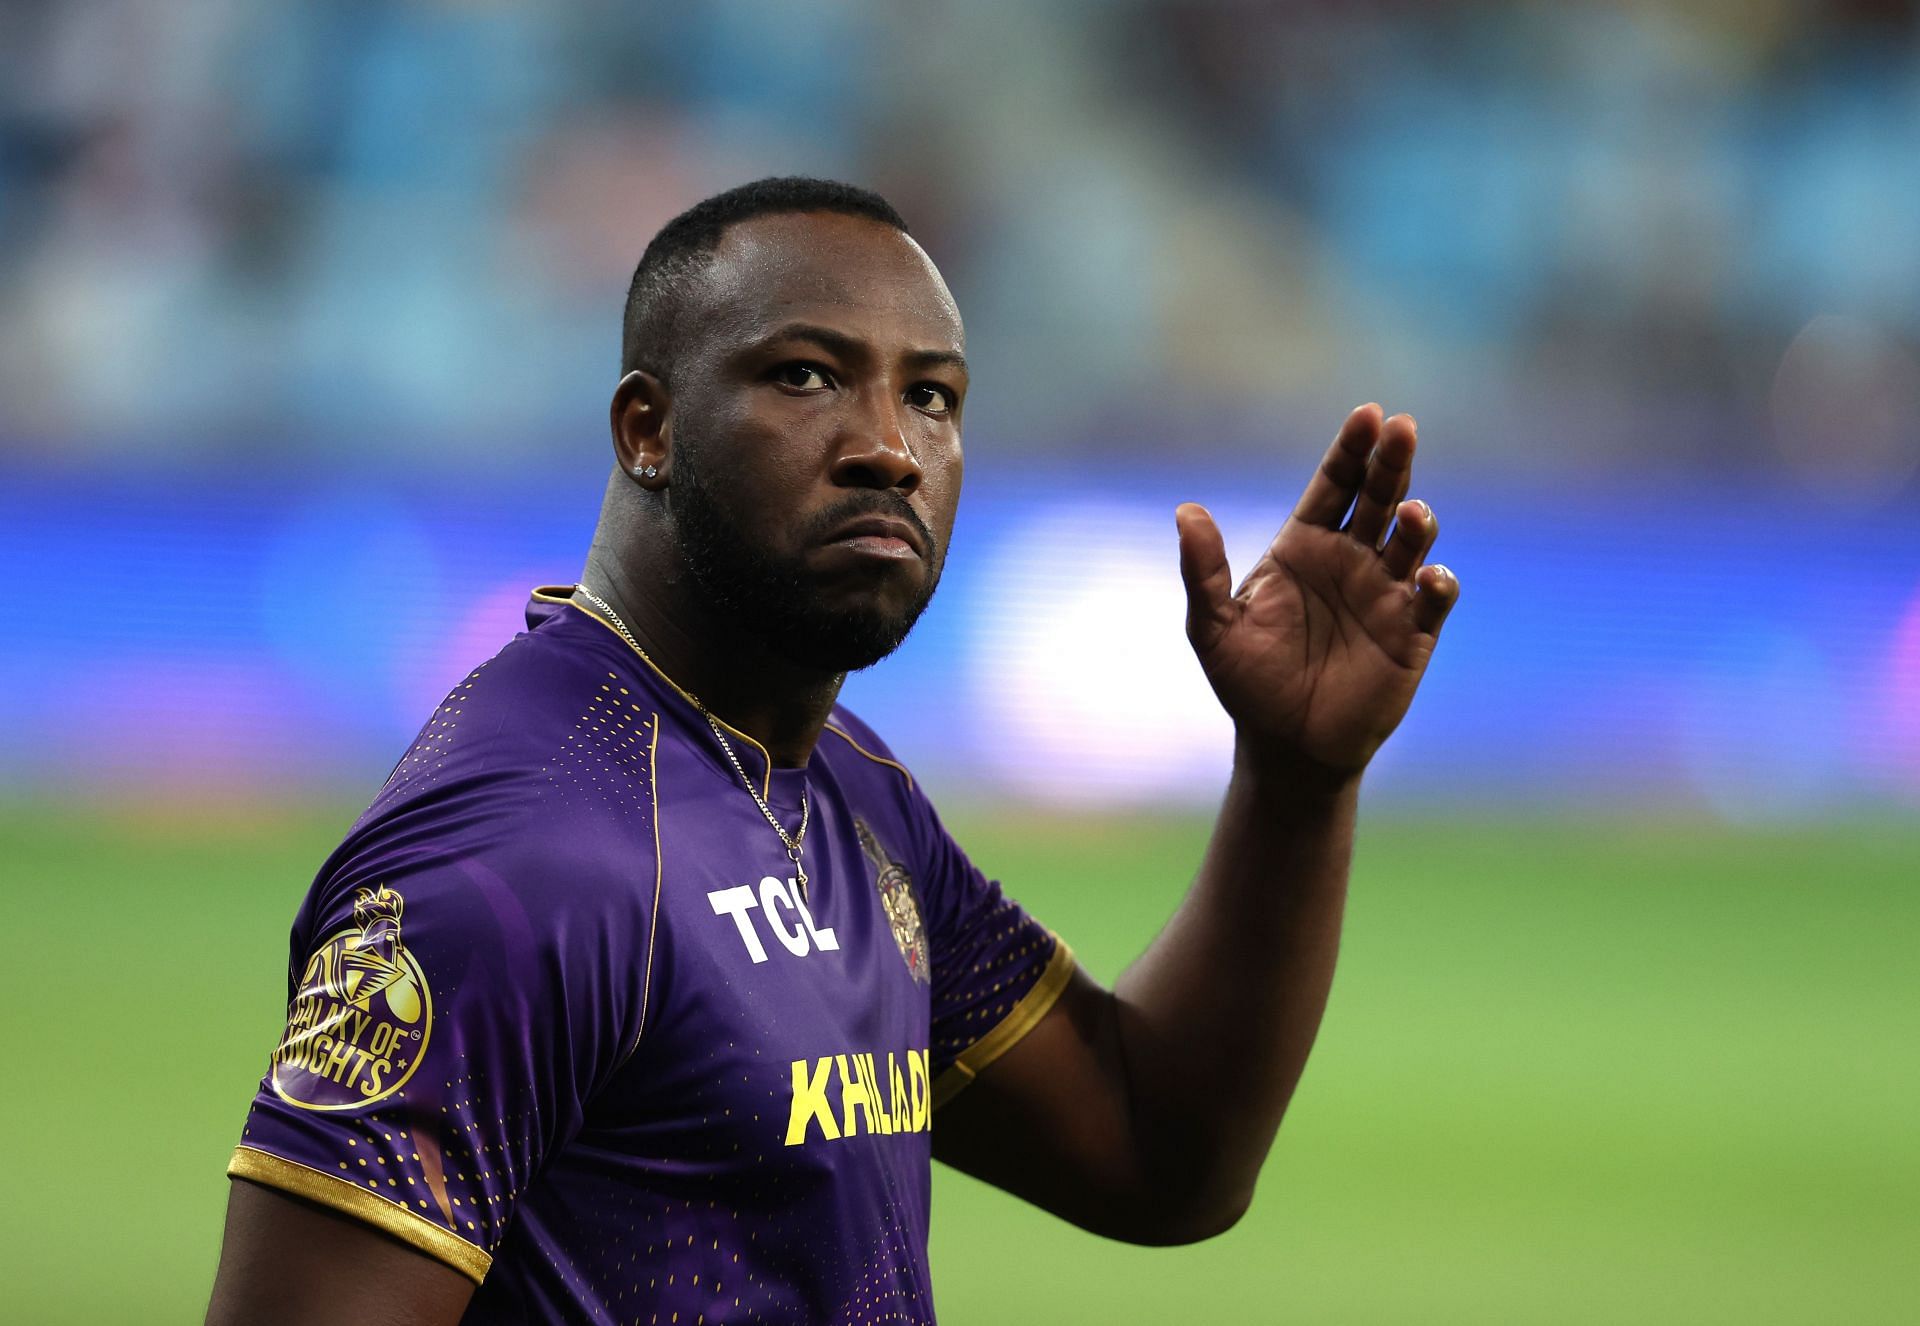 &lt;a href=&#039;https://www.sportskeeda.com/team/kolkata-knight-riders&#039; target=&#039;_blank&#039; rel=&#039;noopener noreferrer&#039;&gt;KKR&lt;/a&gt;&#039;s search for an Andre Russell replacement hasn&#039;t ever ended